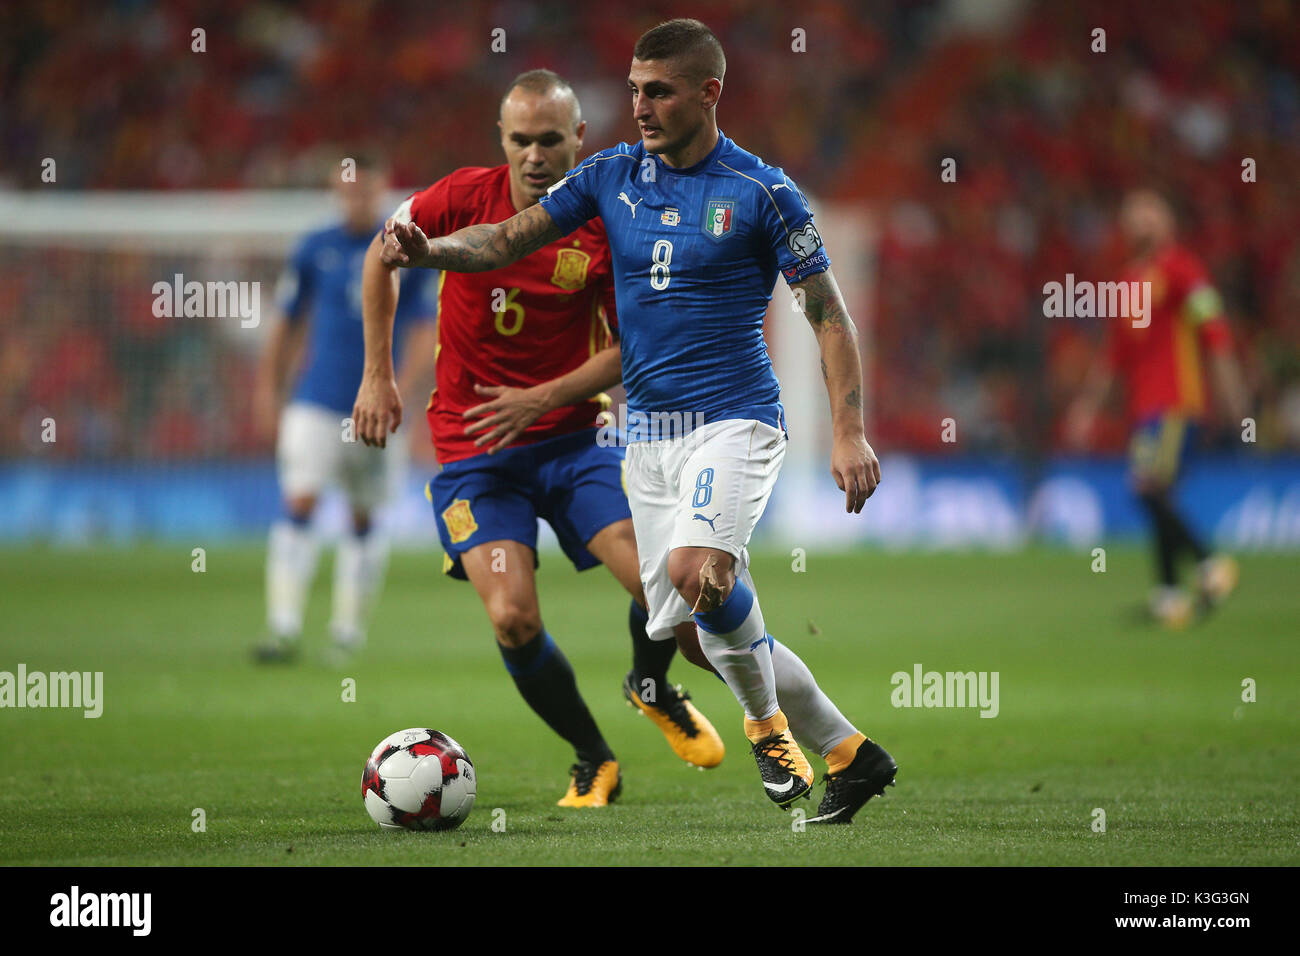 Madrid, Spain. 2nd September, 2017. World Cup qualifiers Russia 2018. Group G. Match between Spain vs Italy. Veratti and Iniesta in action during the match. Credit: Independent Photo Agency Srl/Alamy Live News Stock Photo